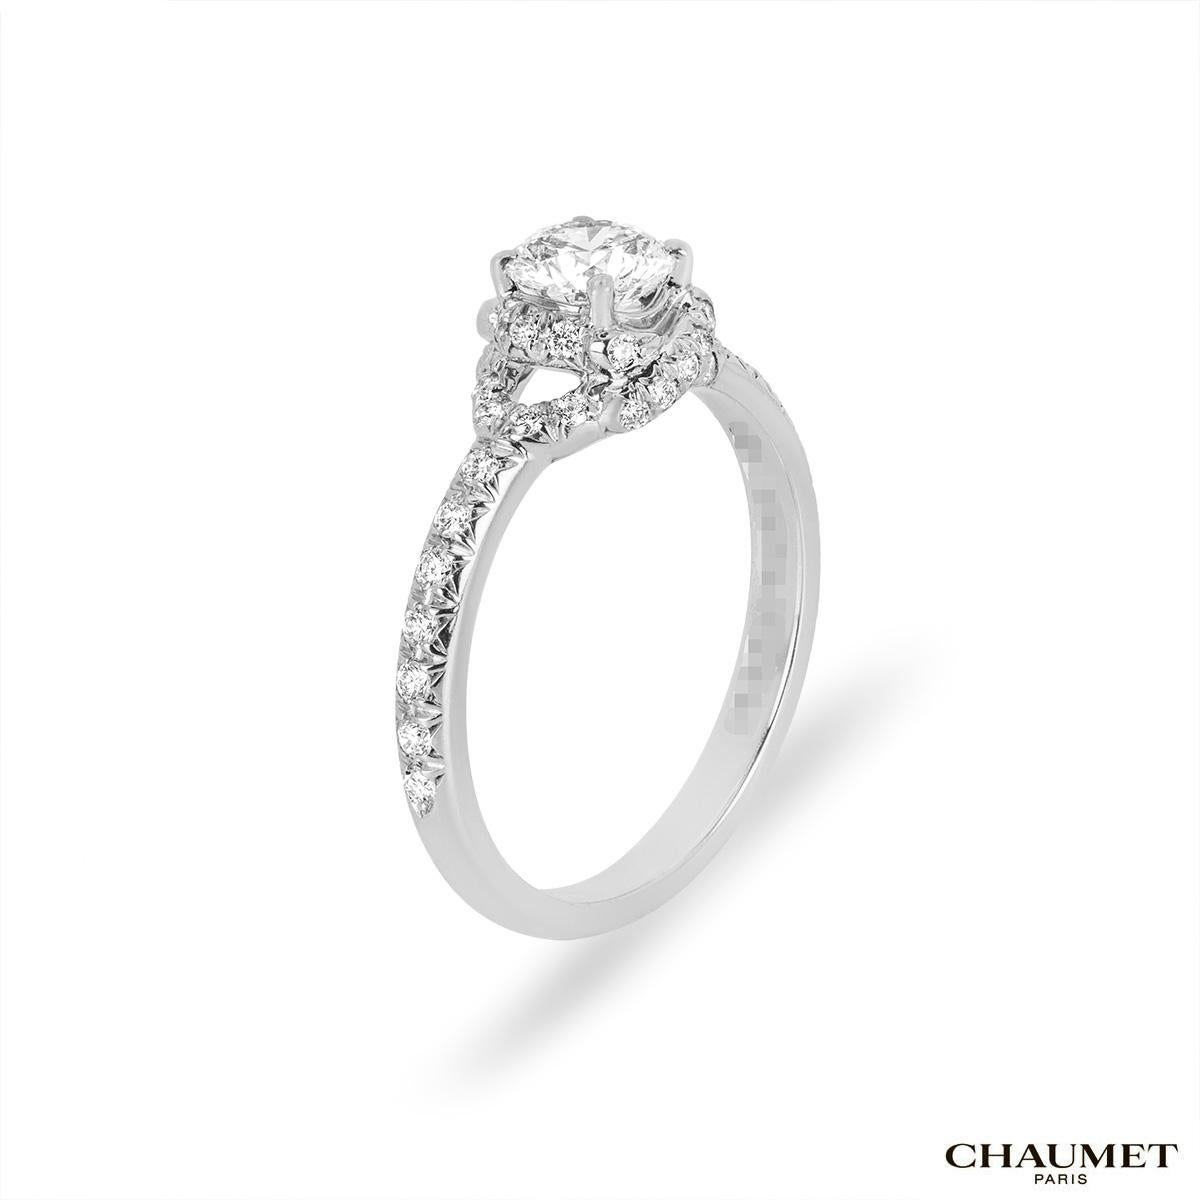 A stunning platinum Chaumet ring from the Liens D'Amour collection. The ring is set to the centre with a round brilliant cut diamond weighing 0.51ct, G colour and VVS2 clarity. The diamond scores an excellent rating in all three aspects for cut,